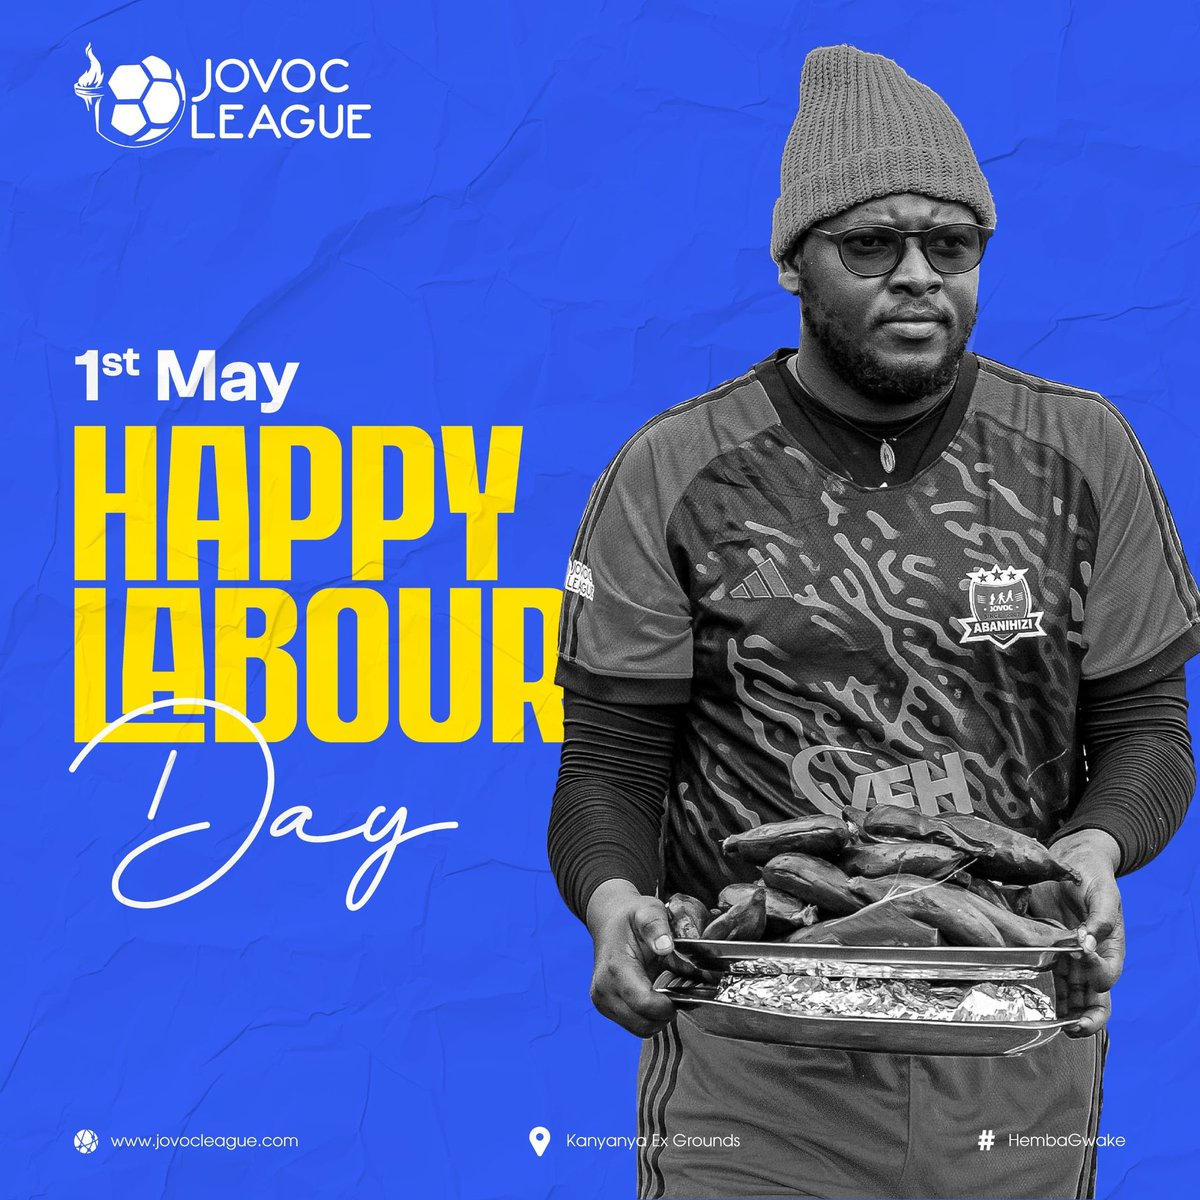 Cheers to all the workers making a difference! Happy Labour Day! #JLSeasonIV | #HembaGwake